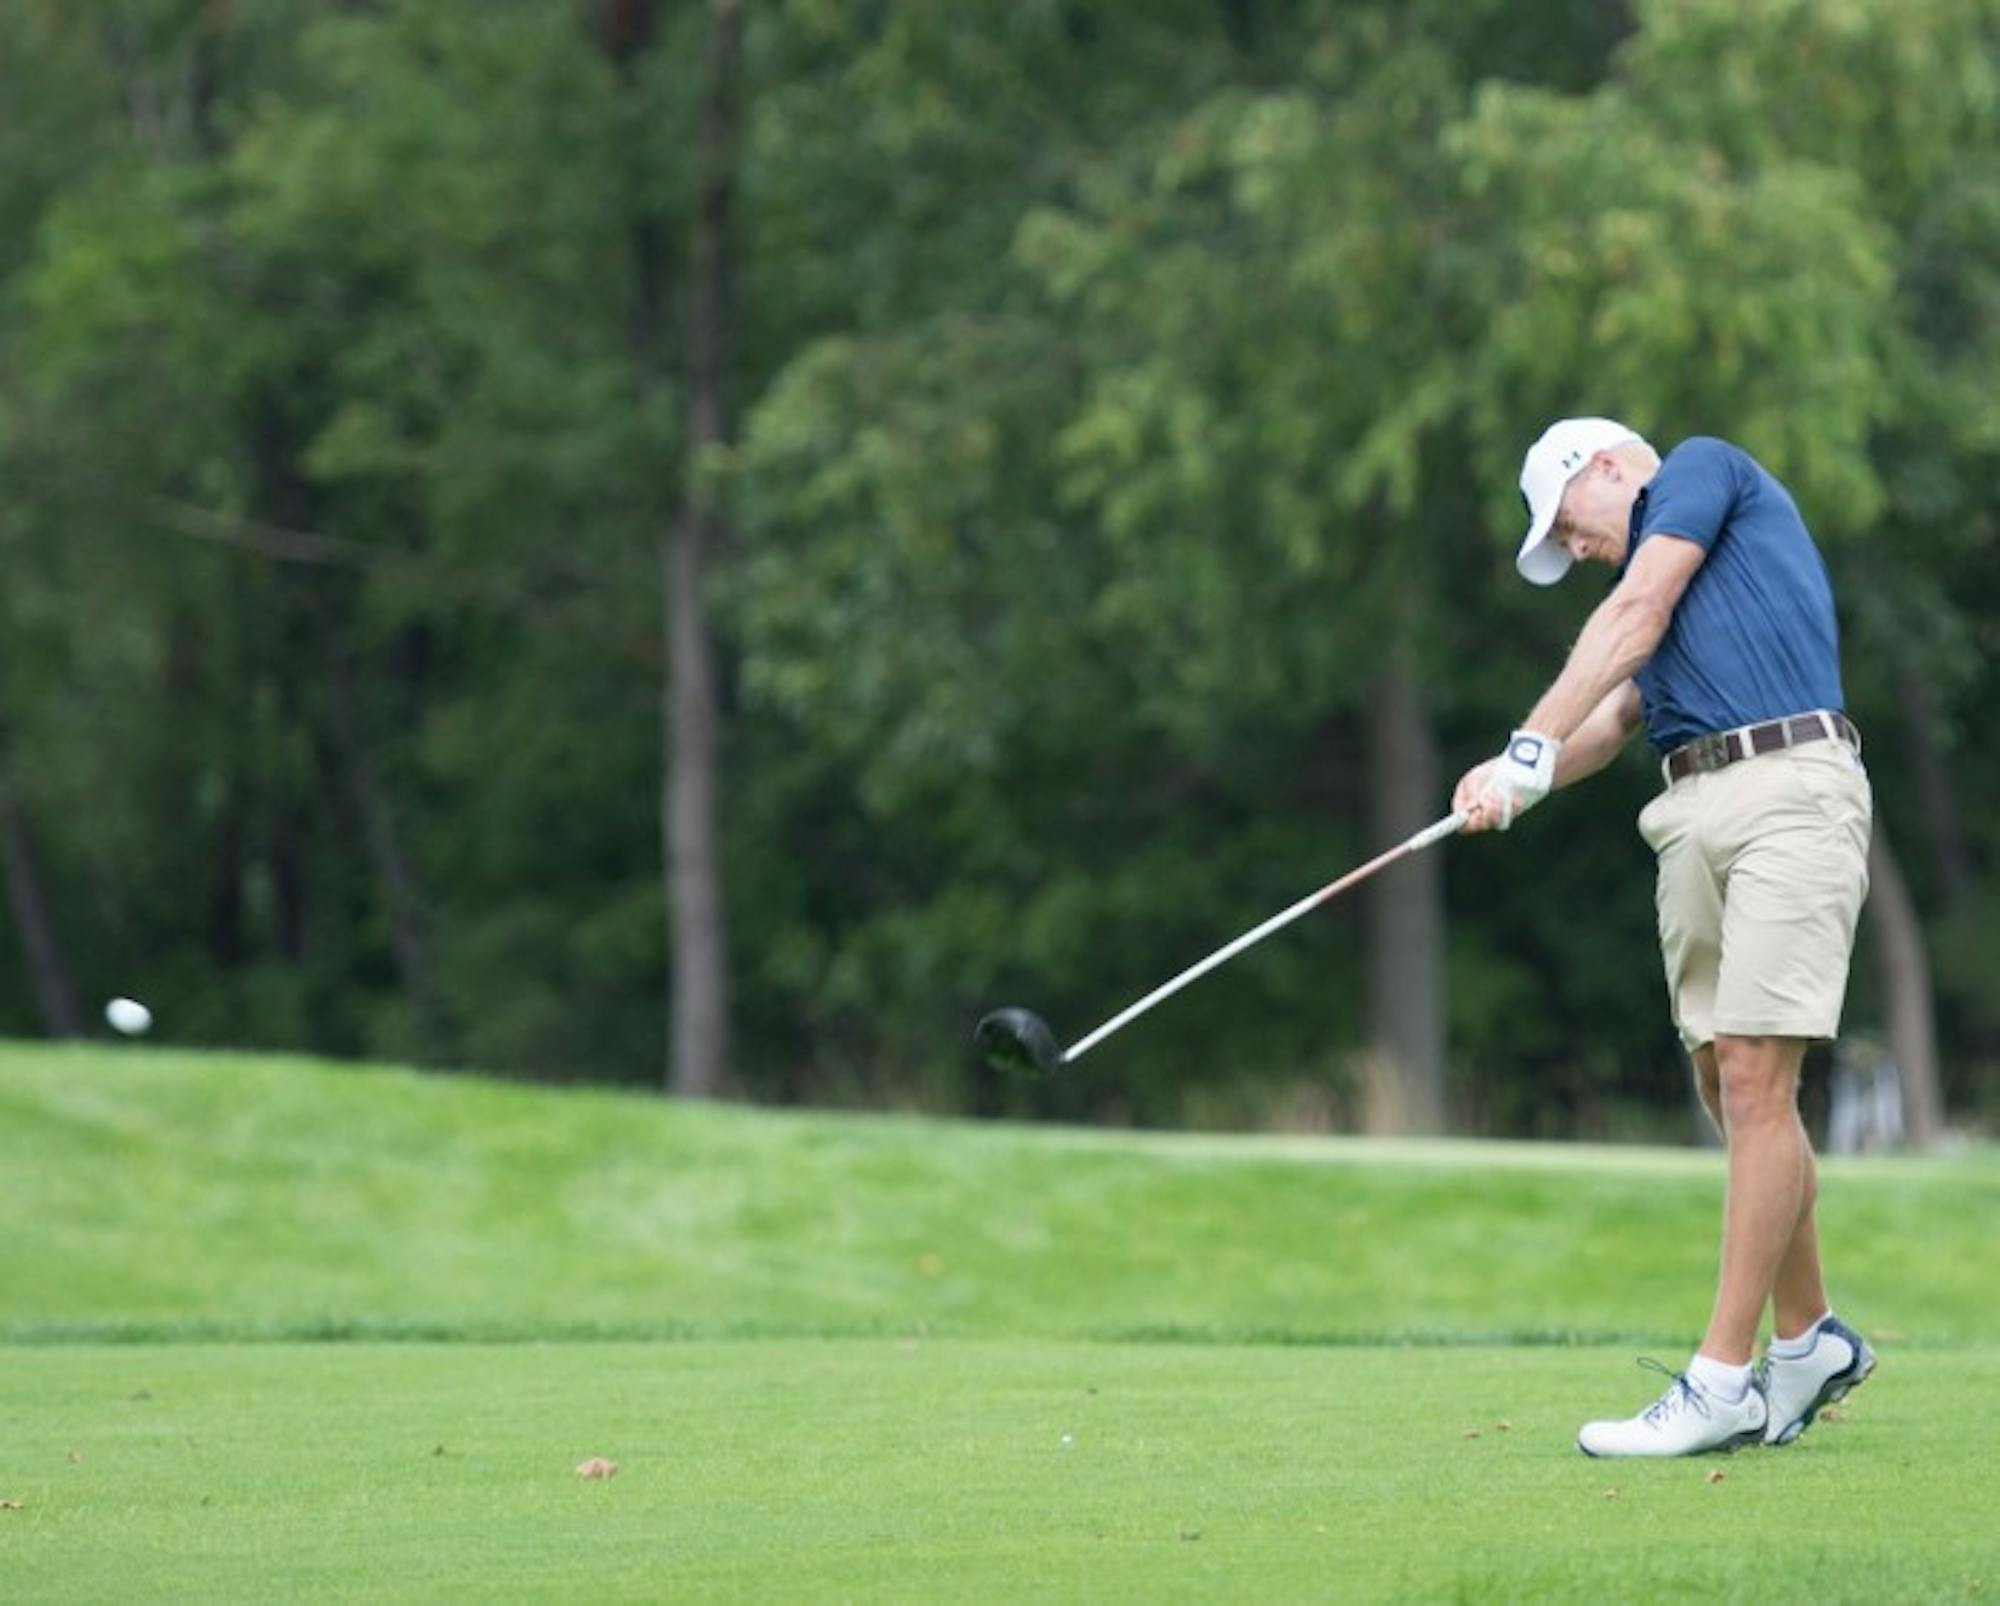 Irish senior David Lowe drives the ball during the Notre Dame Kickoff Challenge at the Warren Golf Course on Aug. 31.